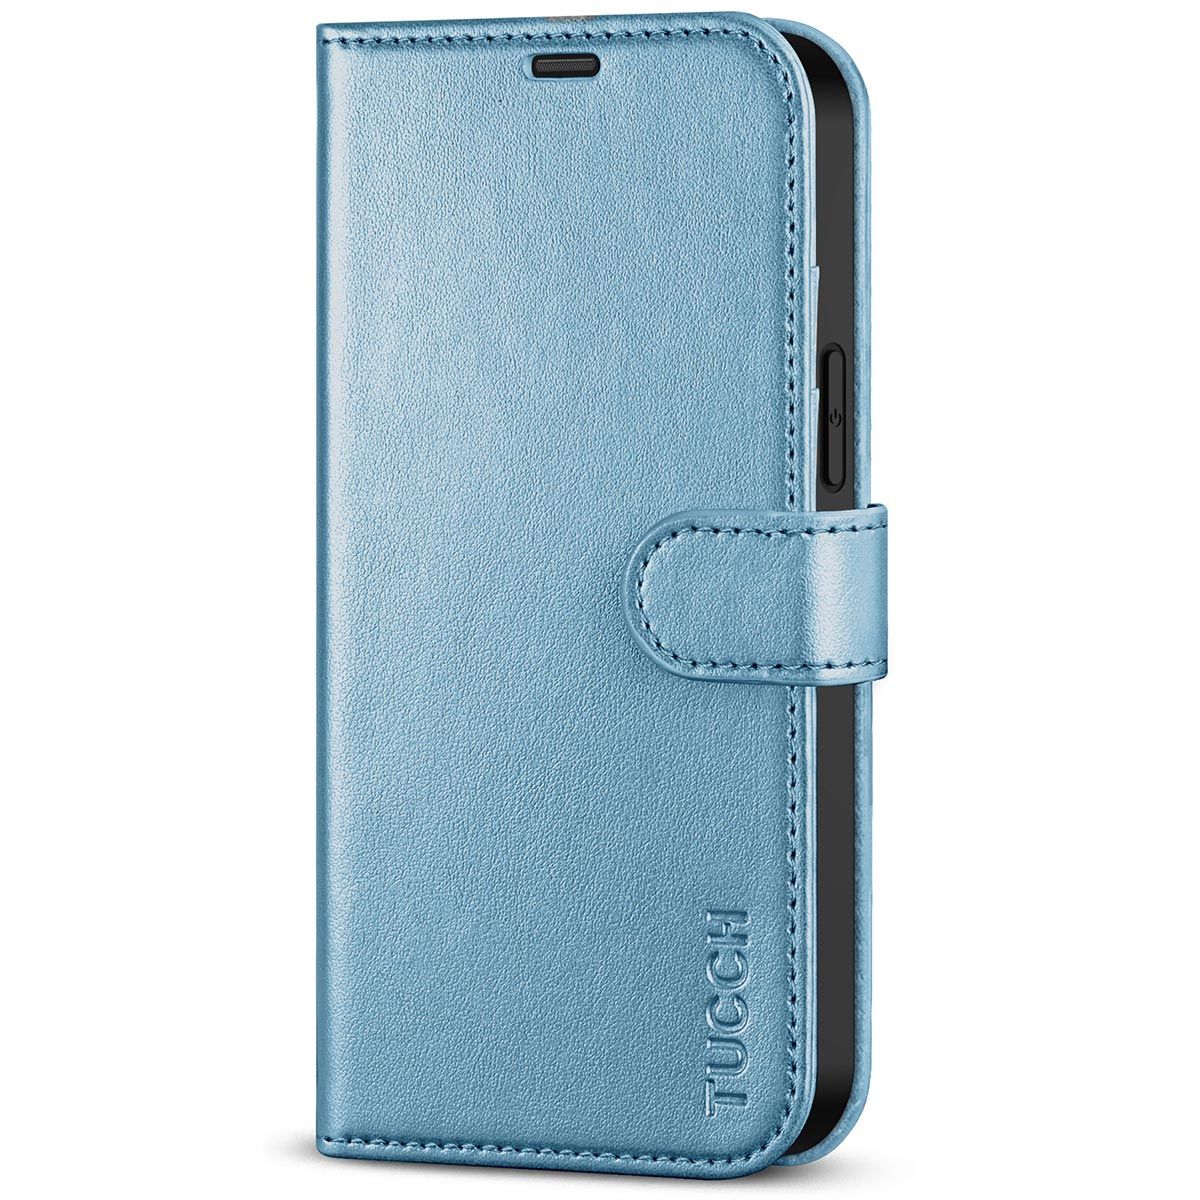  HOUCY Wallet Case for iPhone 14/14 Max/14 Pro/14 Pro Max,  Ultra-Thin Multi-Card Zippered Leather Case, Flip Cover with Card Slot  Bracket Shockproof Protective Case (Color : Blue, Size : 14 Pro